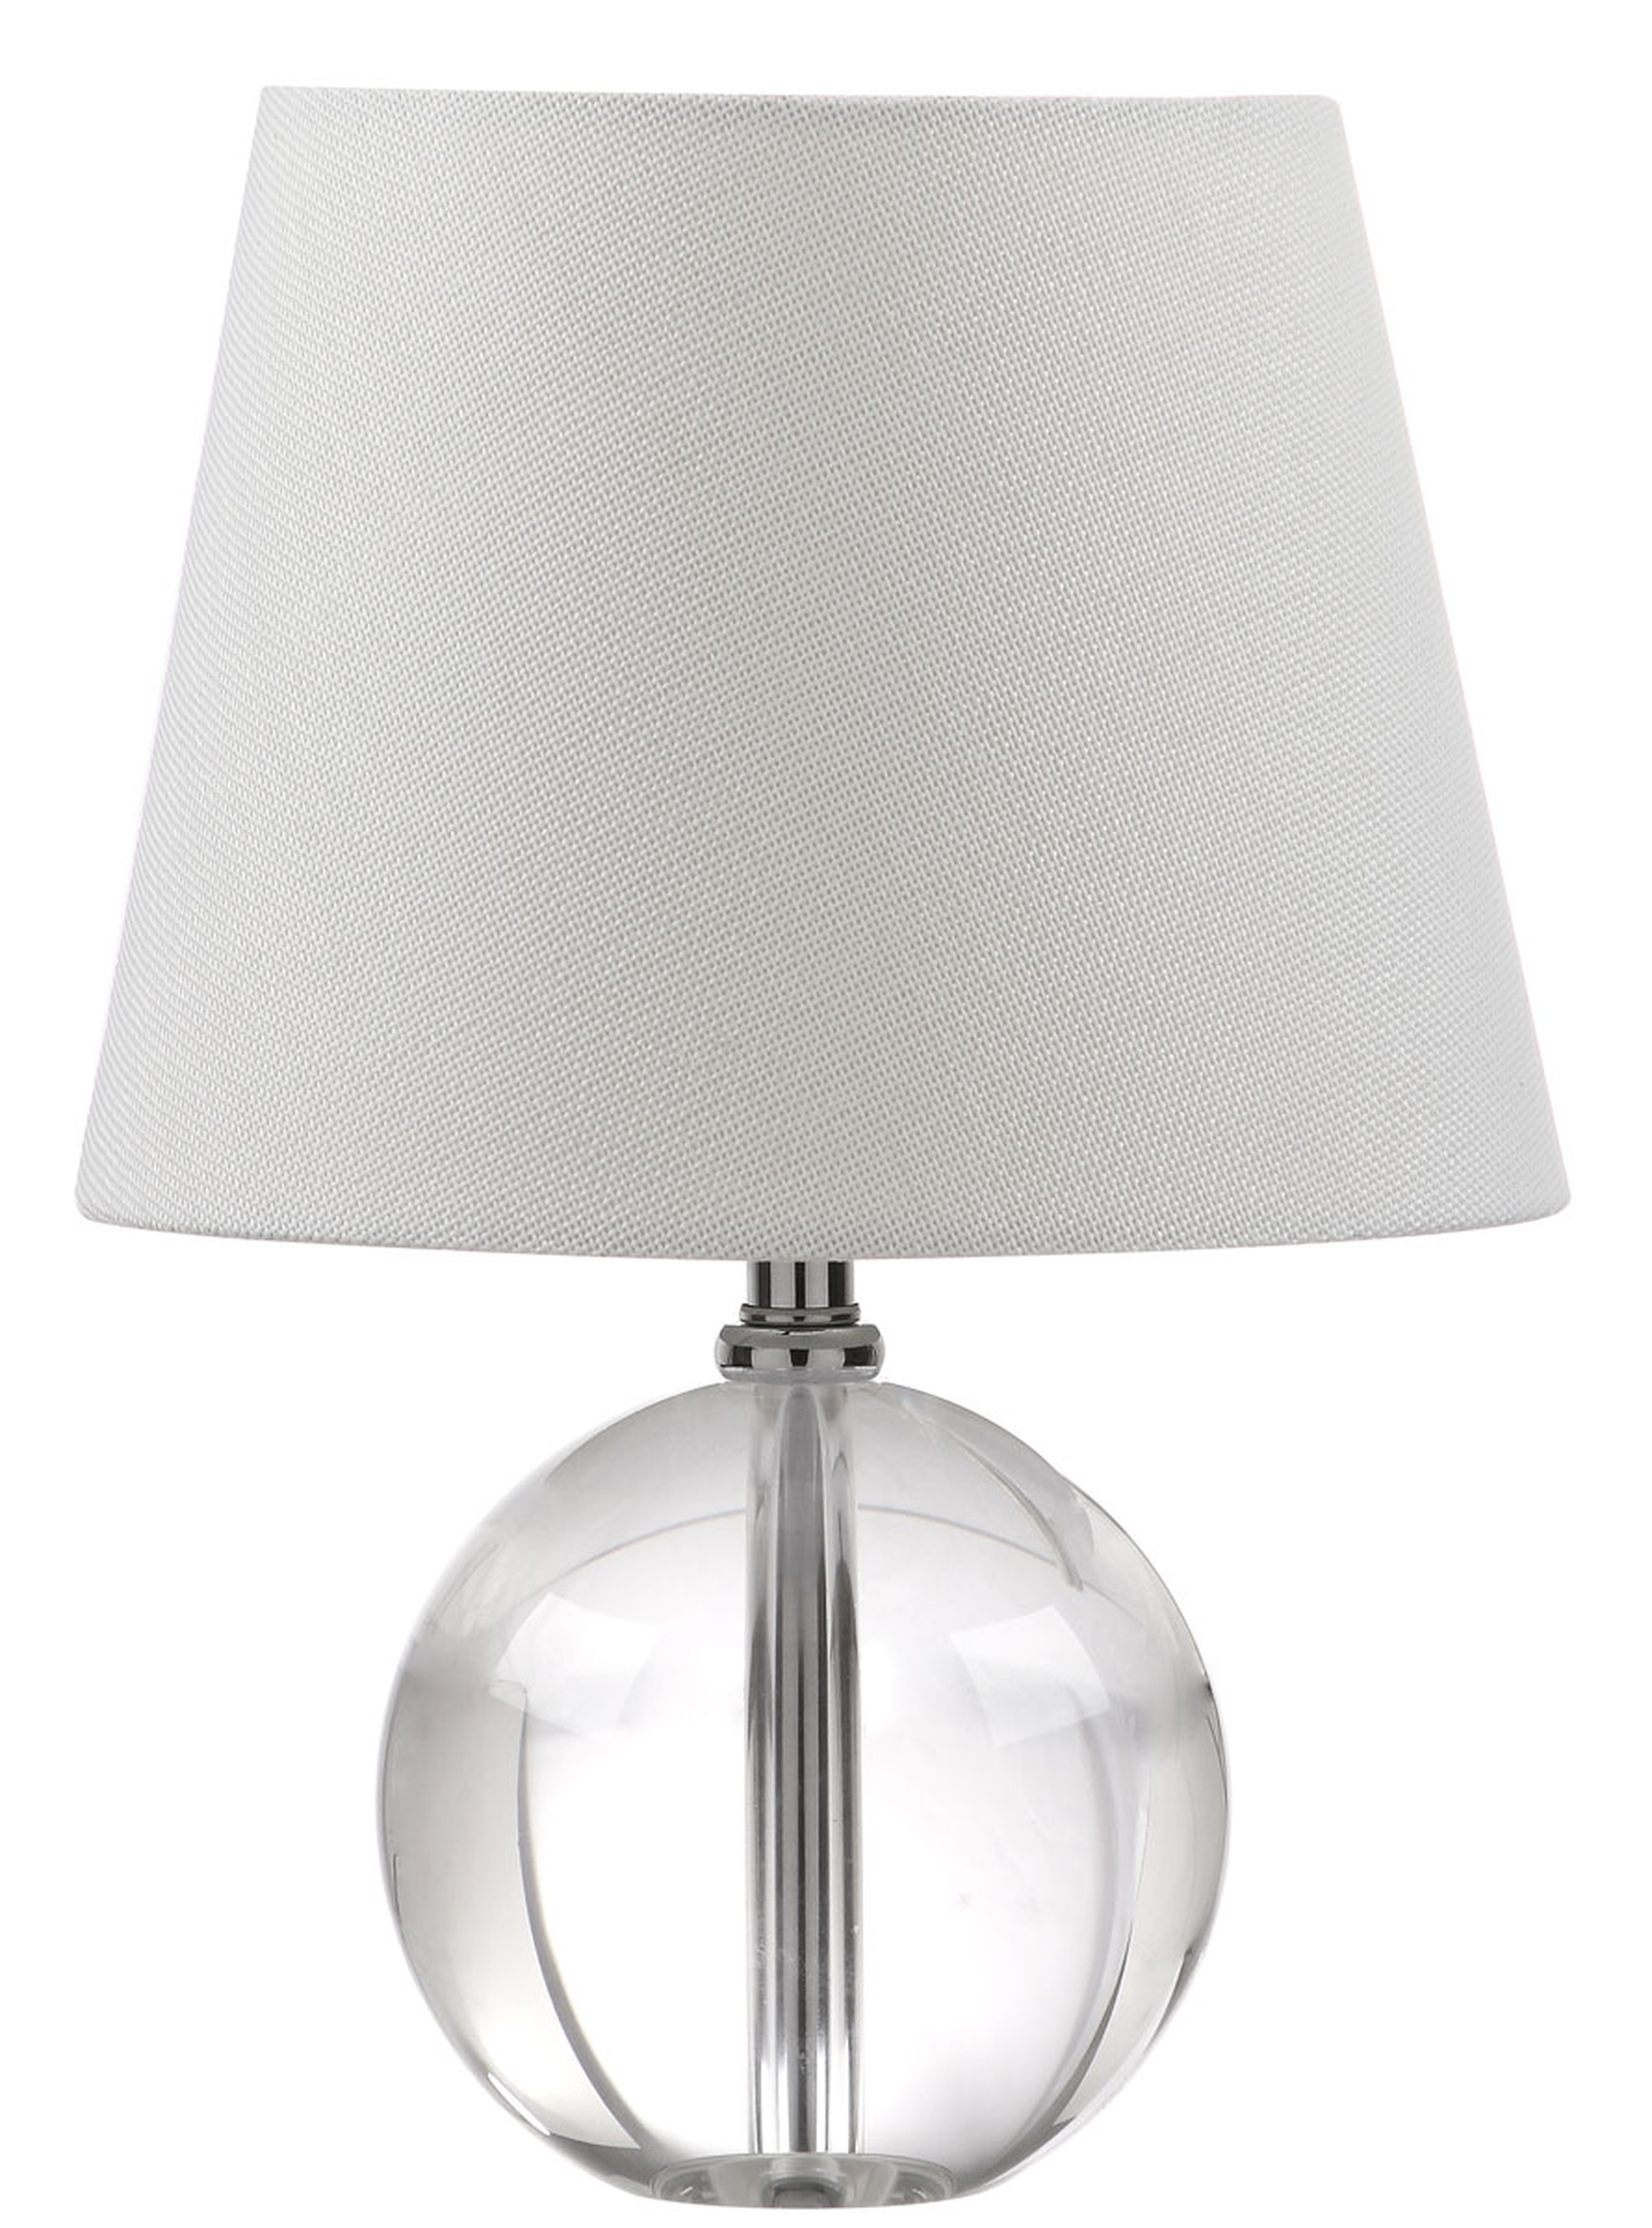 Mable 14-Inch H Table Lamp - Clear - Arlo Home - Arlo Home